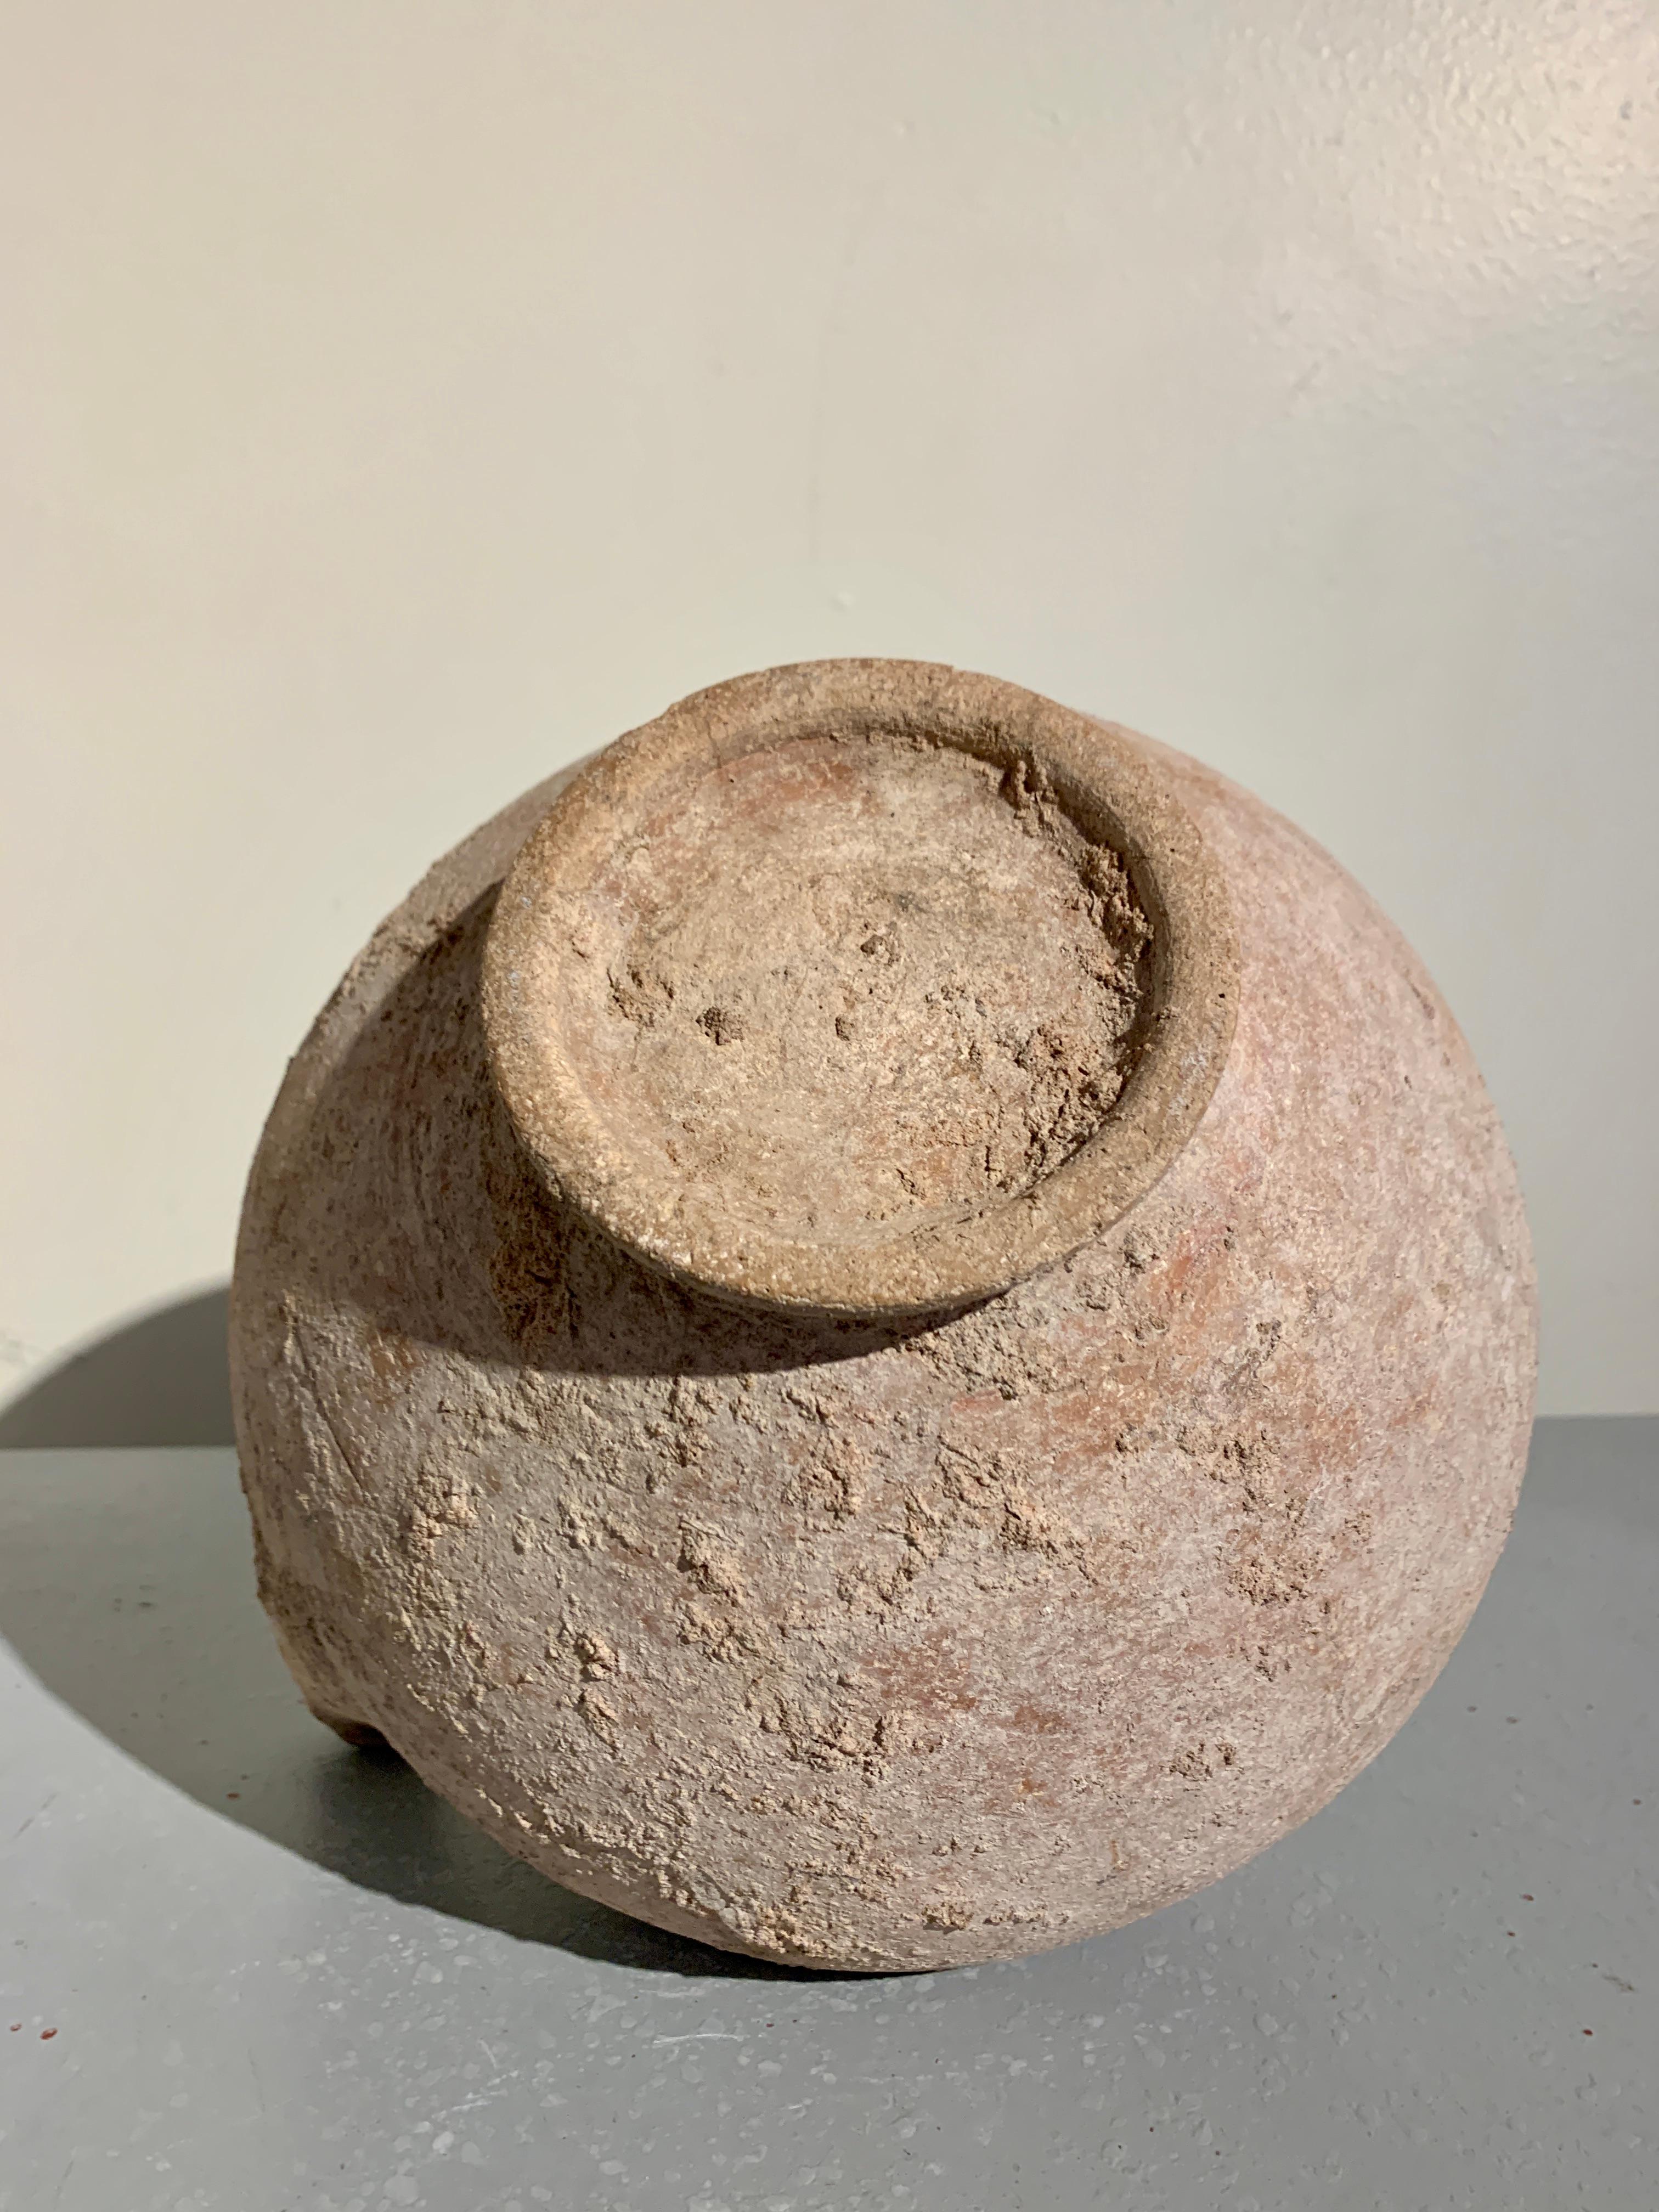 An evocative large pottery pouring vessel, kendi, pre-Khmer, 6th-8th century, Cambodia.

The large kendi of typical form, with a bulbous body set on a ring foot, featuring a single spout emerging from the shoulder, and a narrow, tapering neck